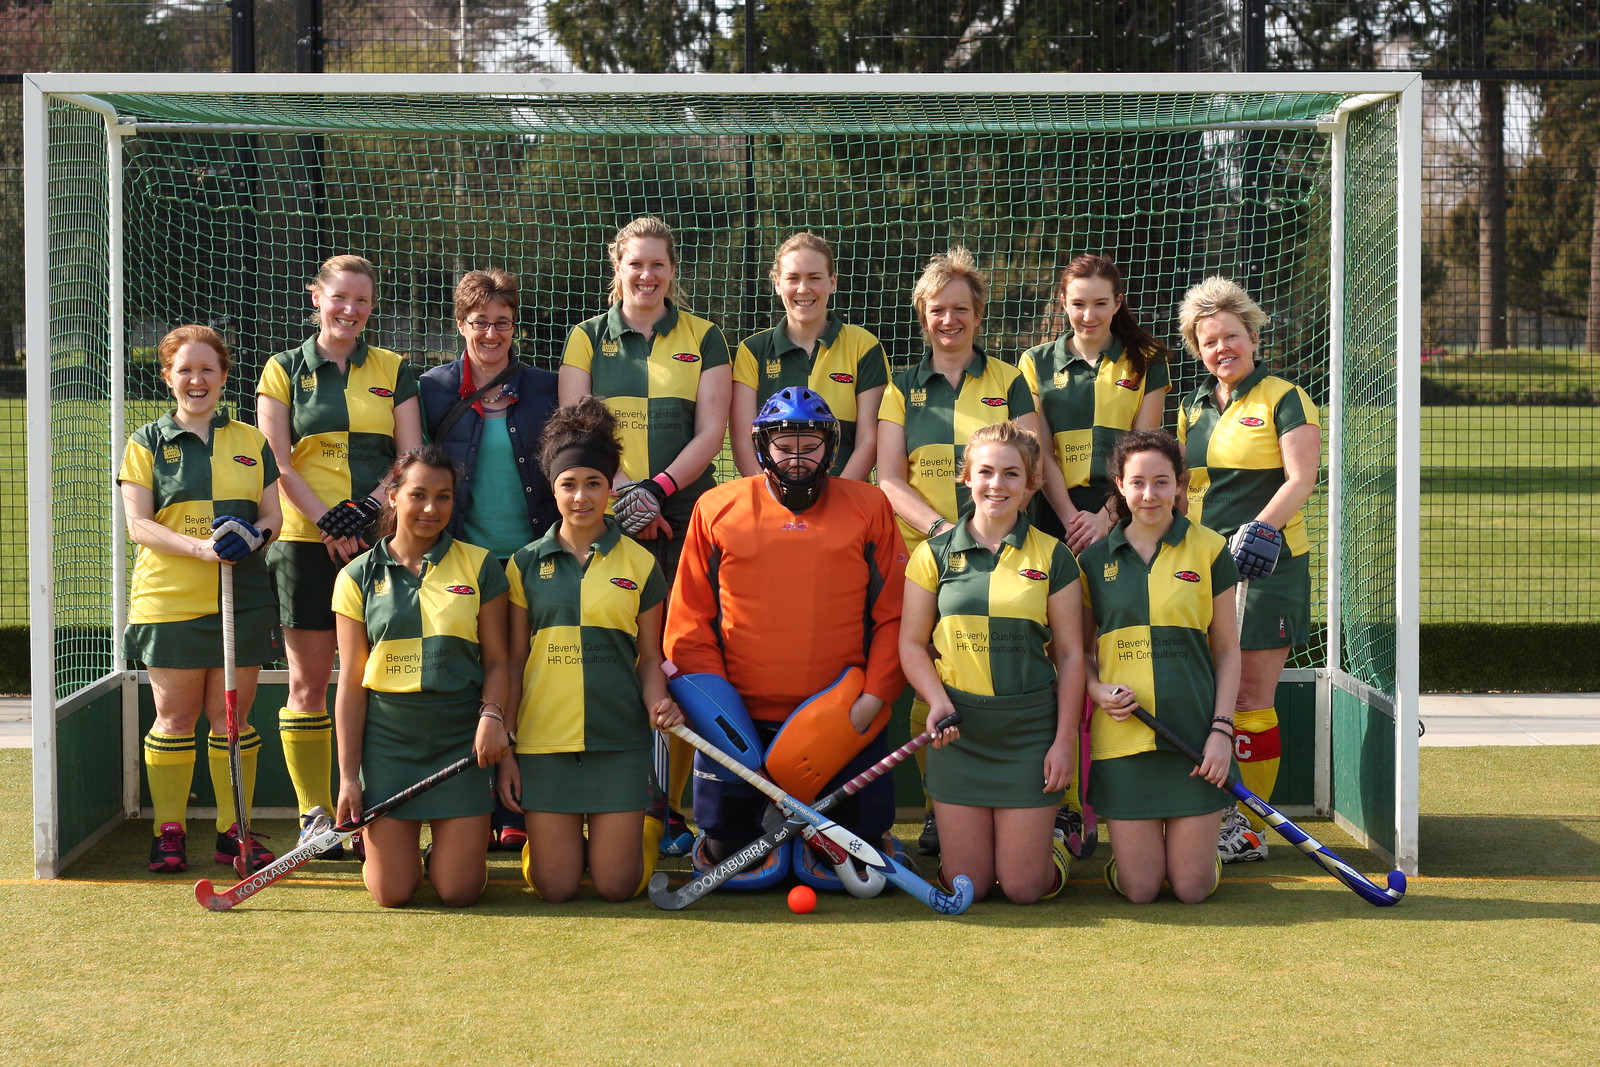 Team pic of the 3rds